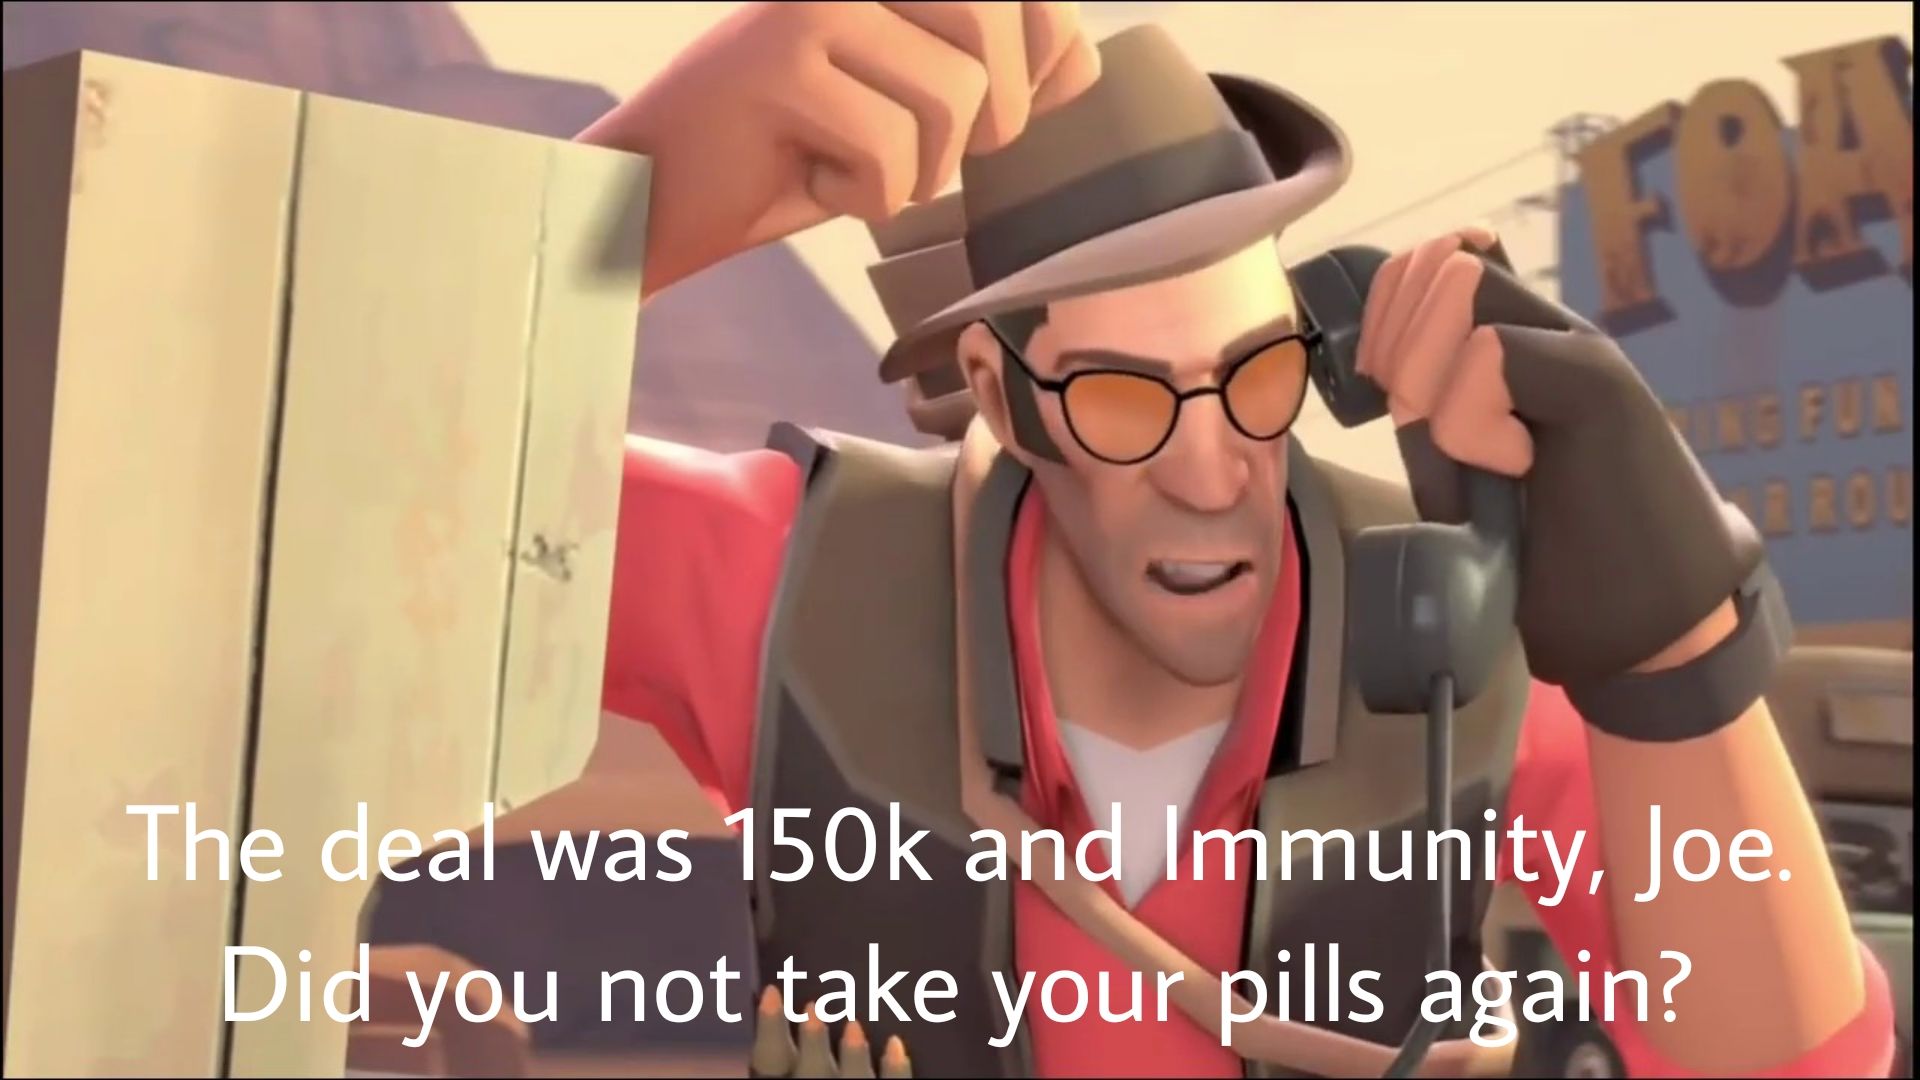 FOA
ING FUN
BROU
The deal was 150k and Immunity, Joe.
Did you not take your pills again?